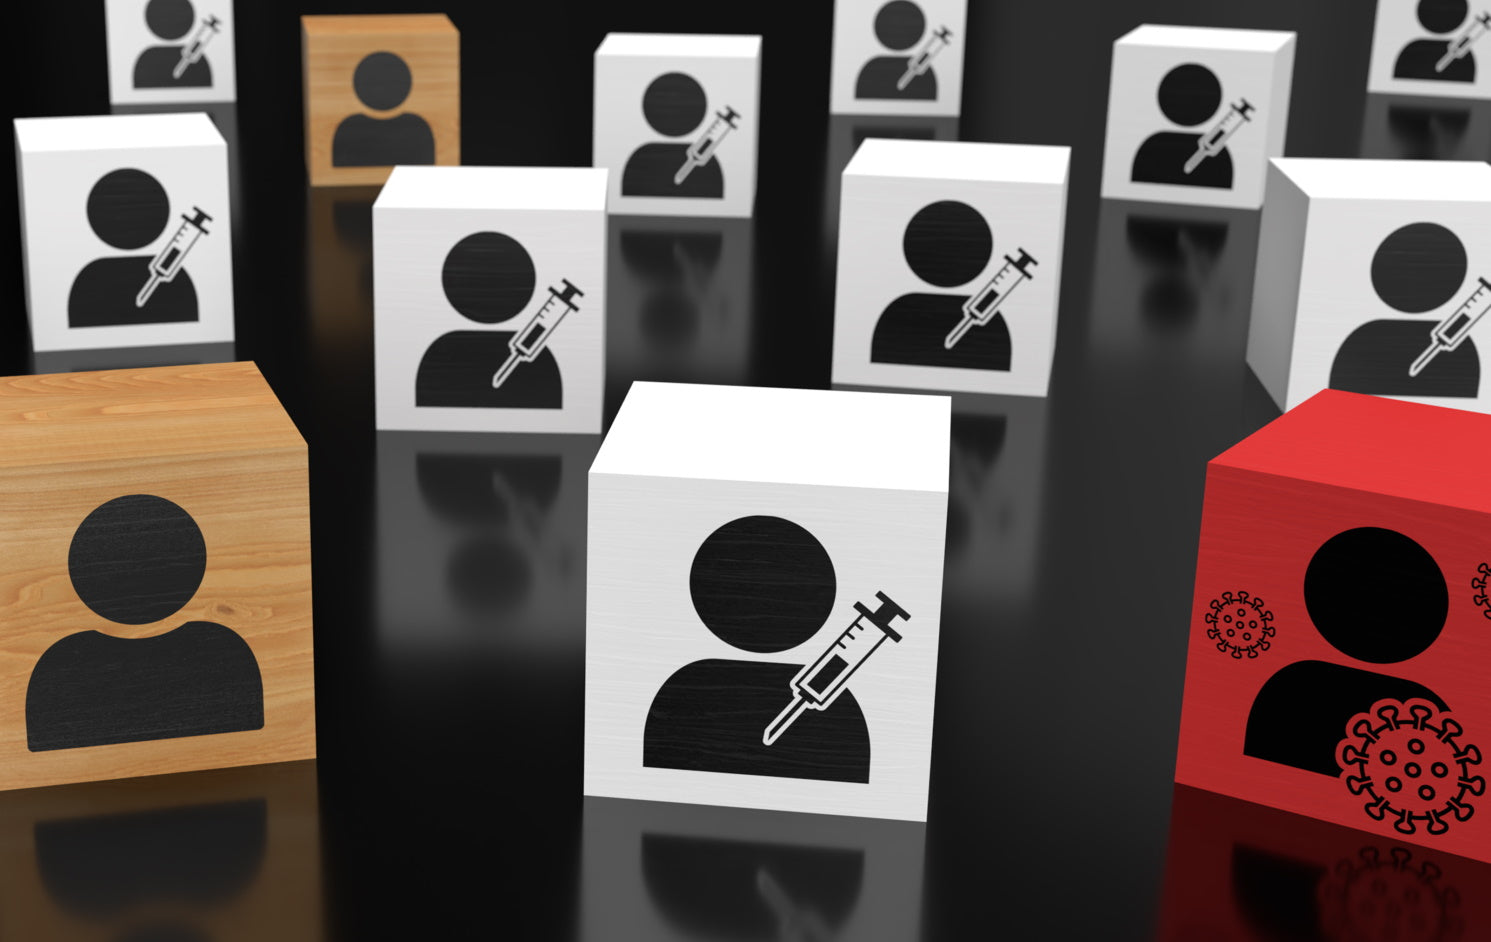 Cubes with icons of people indicating which are vaccinated and which are exposed to viruses